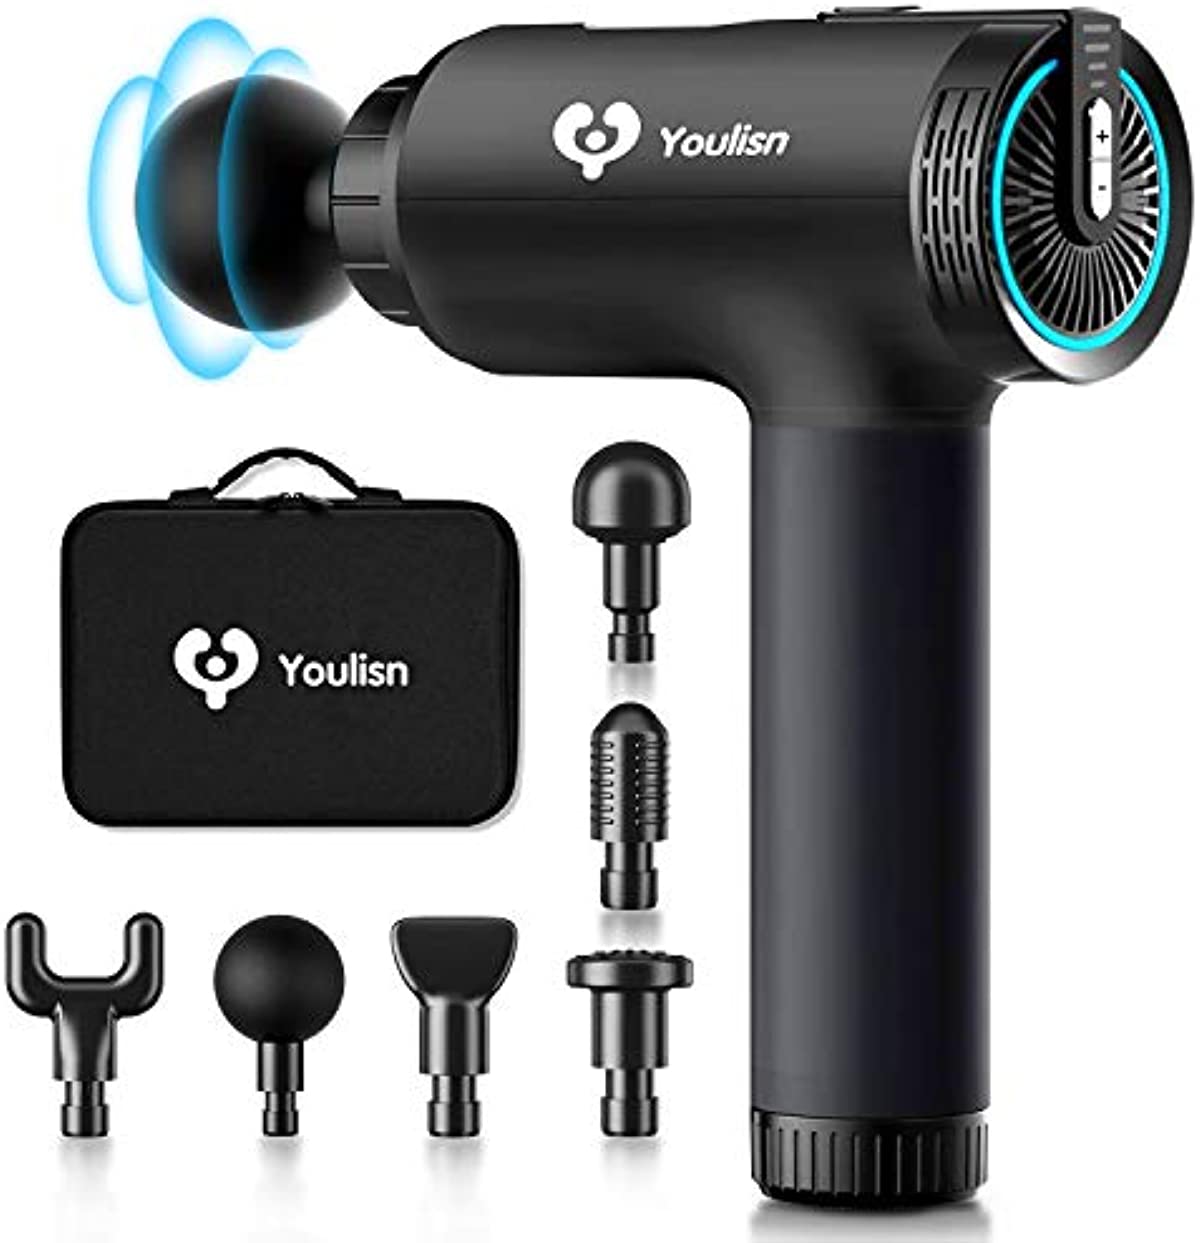 Youlisn Massage Gun Deep Tissue, Handheld Muscle Massager Gun for Athletes, 13 Hours Percussion Time, 12 Speeds 6 Heads Professional Body Massage Gun Relieve Pain Relief and Stiffness